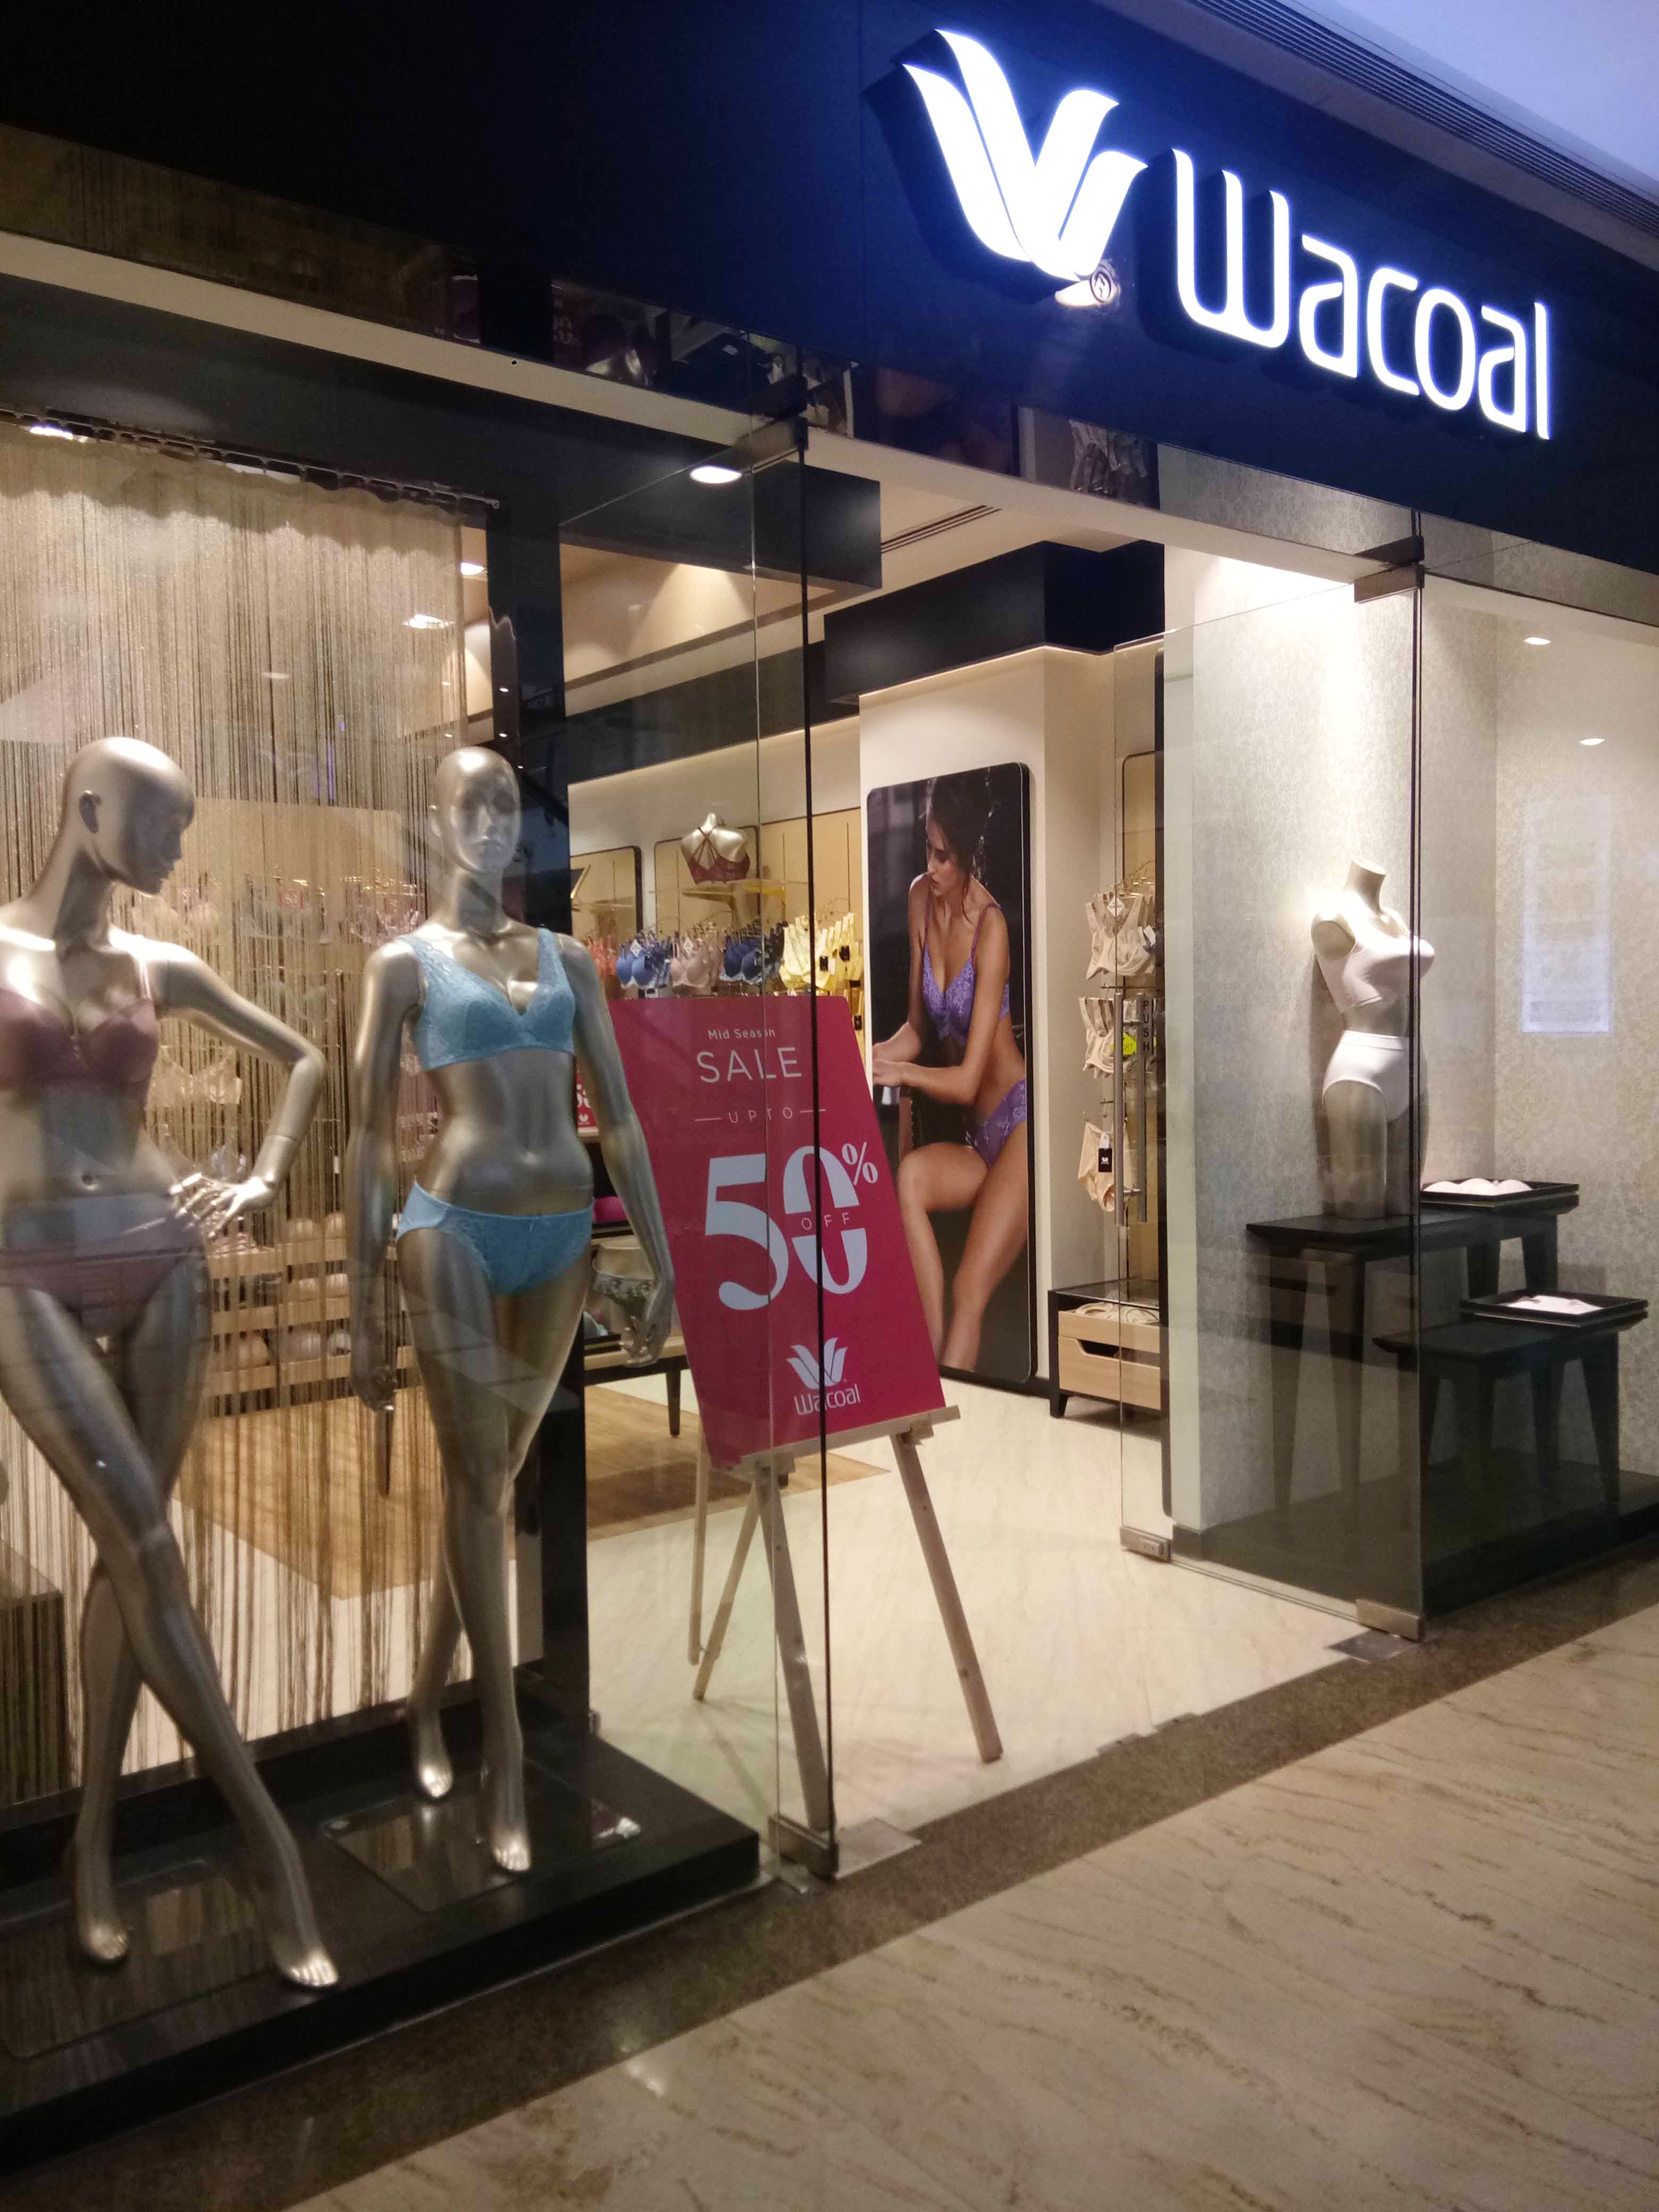 Display window,Boutique,Building,Retail,Display case,Outlet store